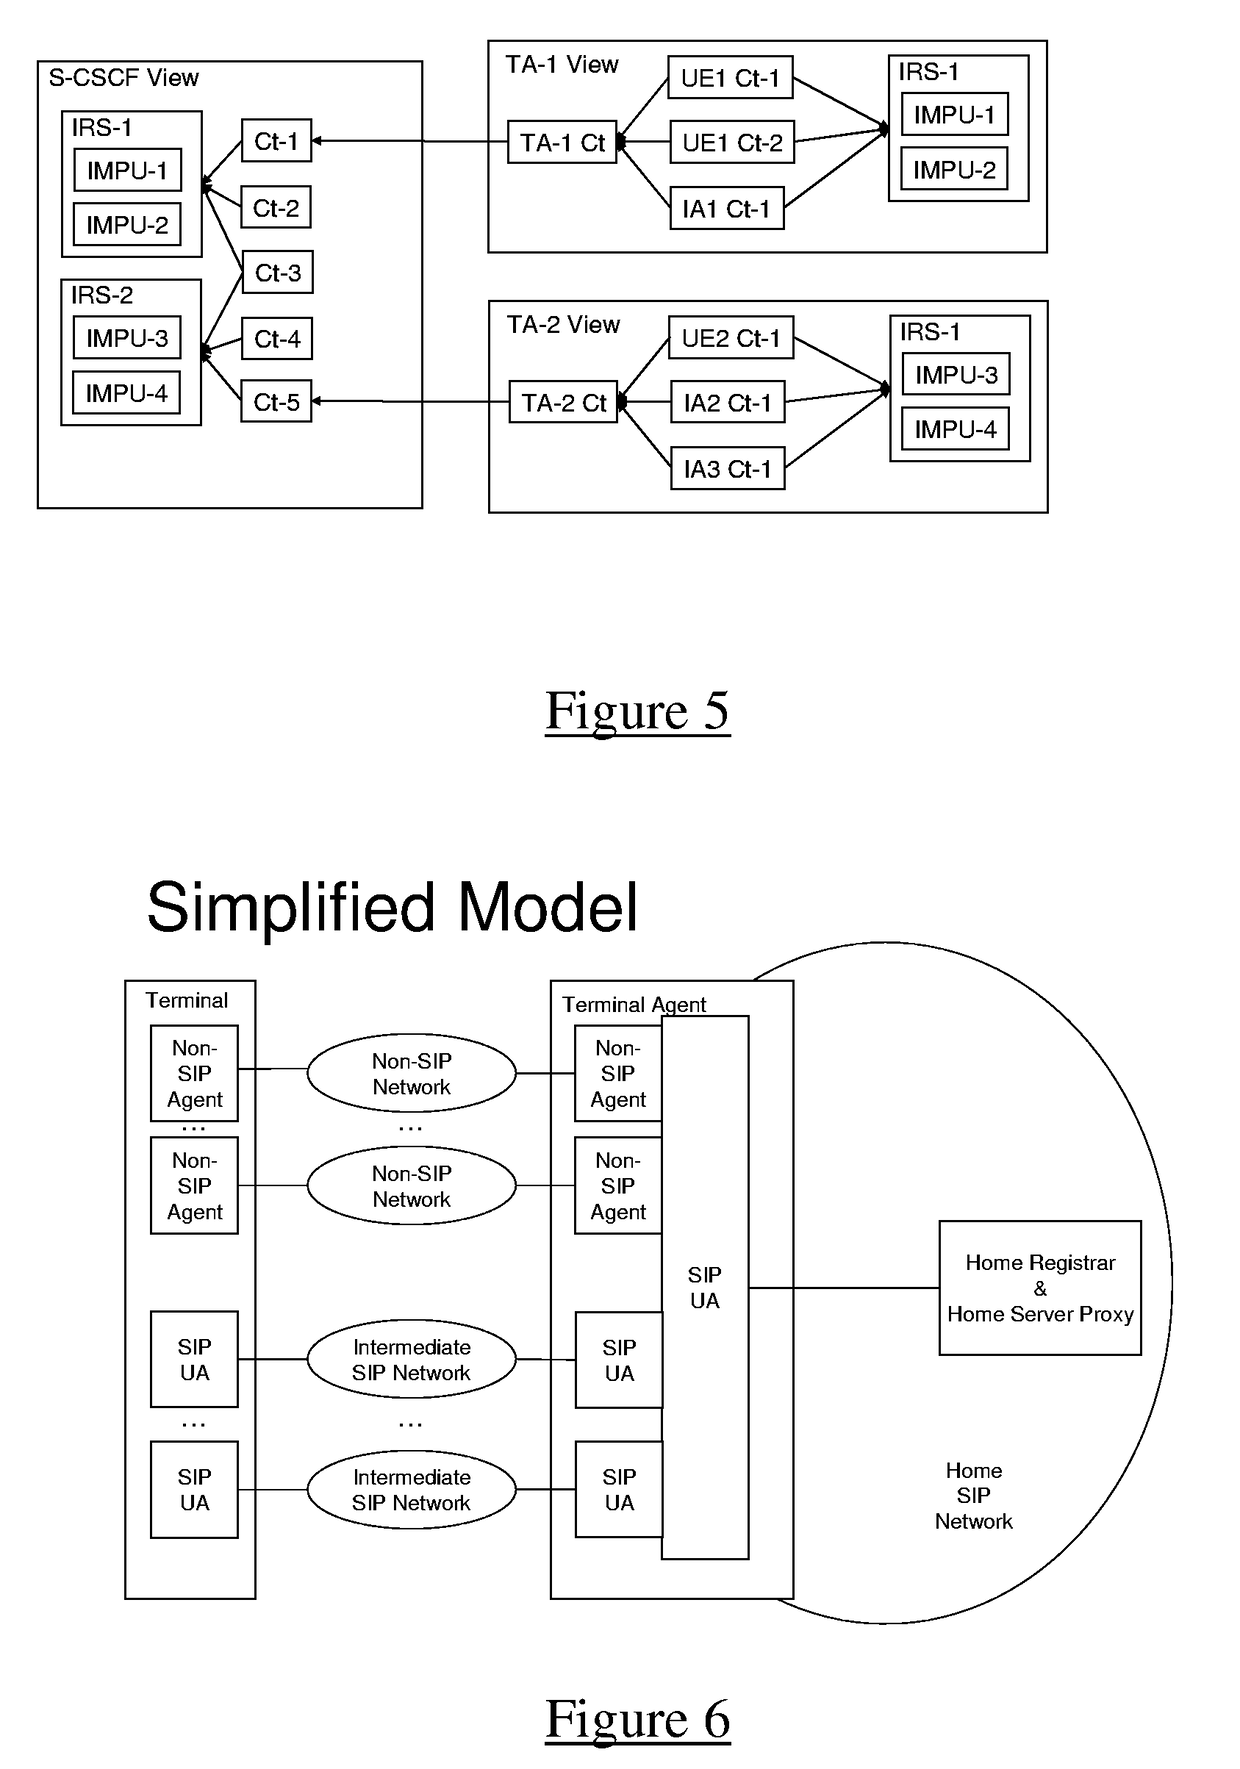 Handling multiple user interfaces in an IP multimedia subsystem